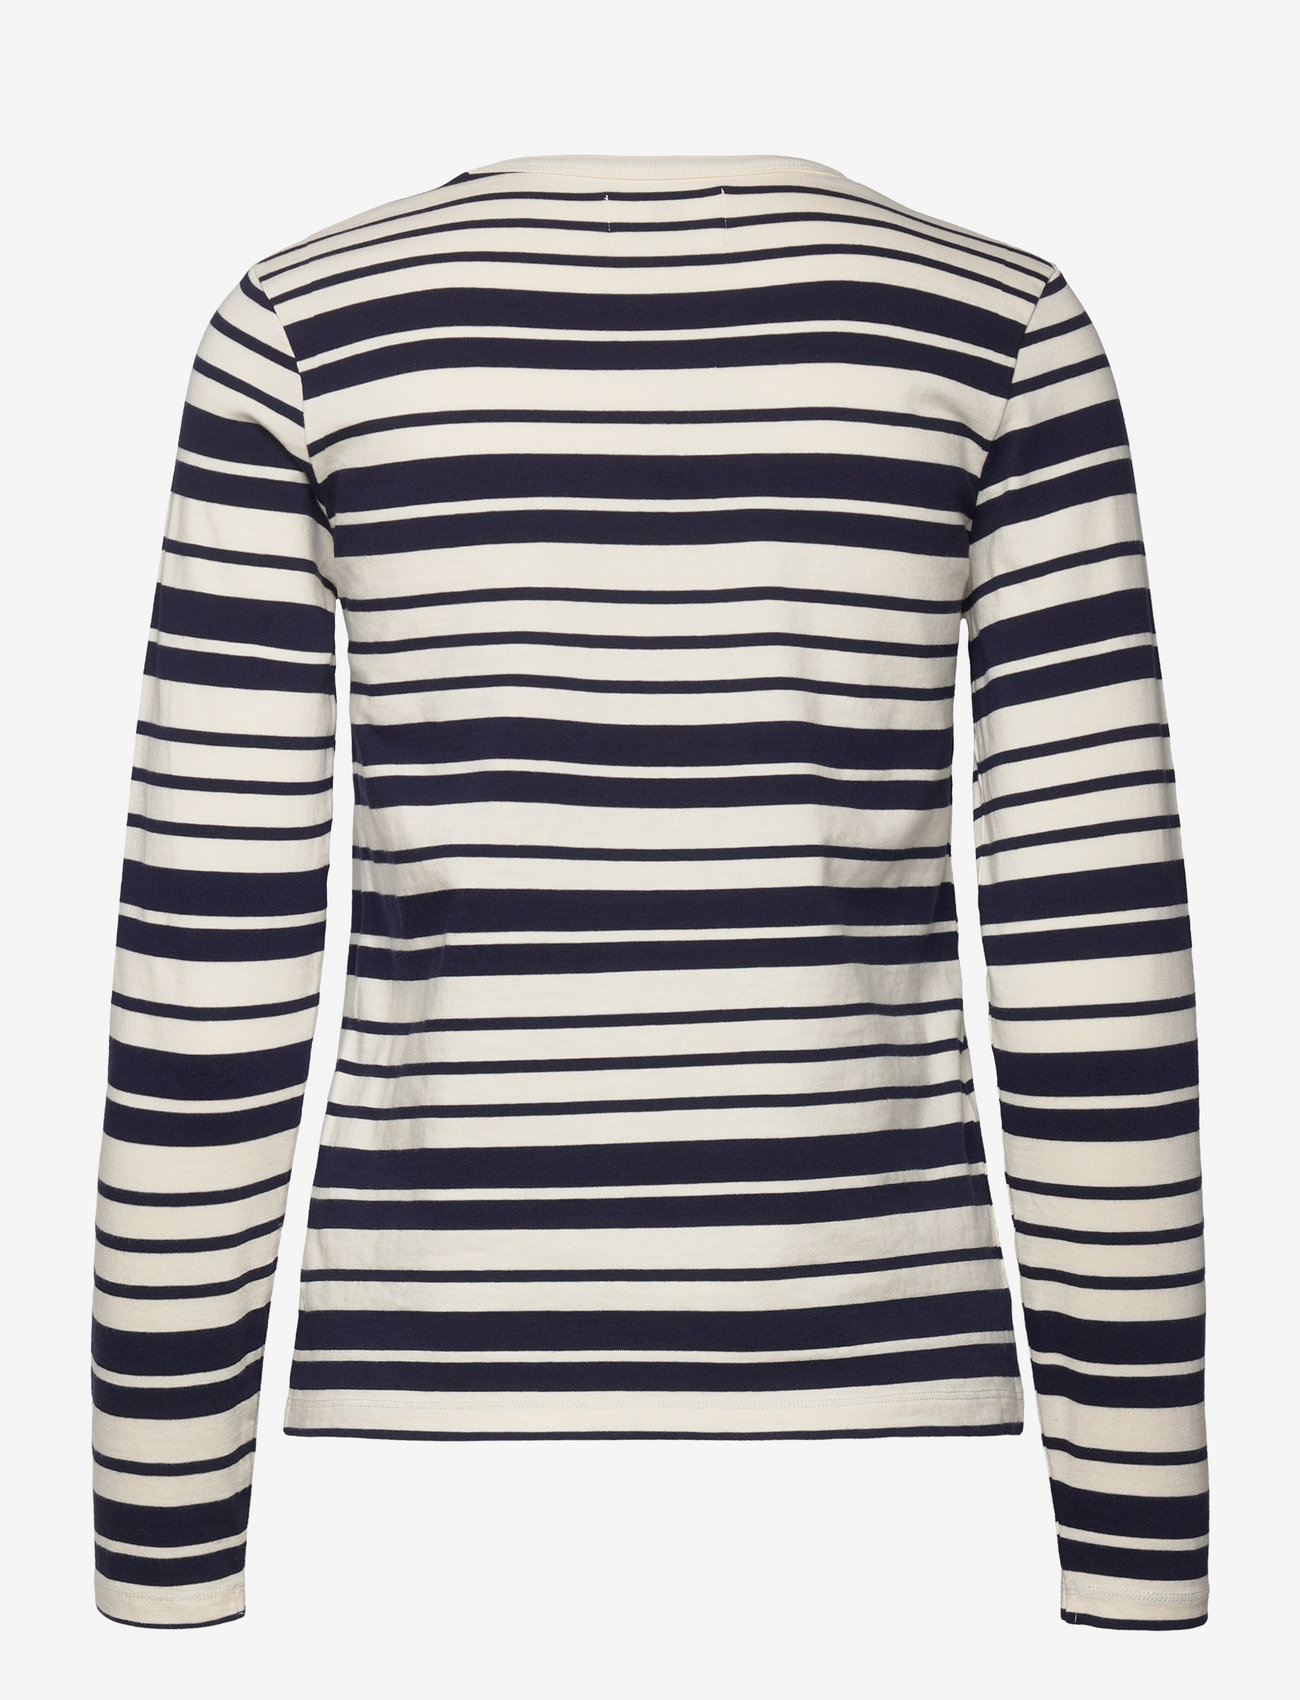 Double A by Wood Wood - Moa stripe long sleeve - t-shirt & tops - off-white/navy stripes - 1